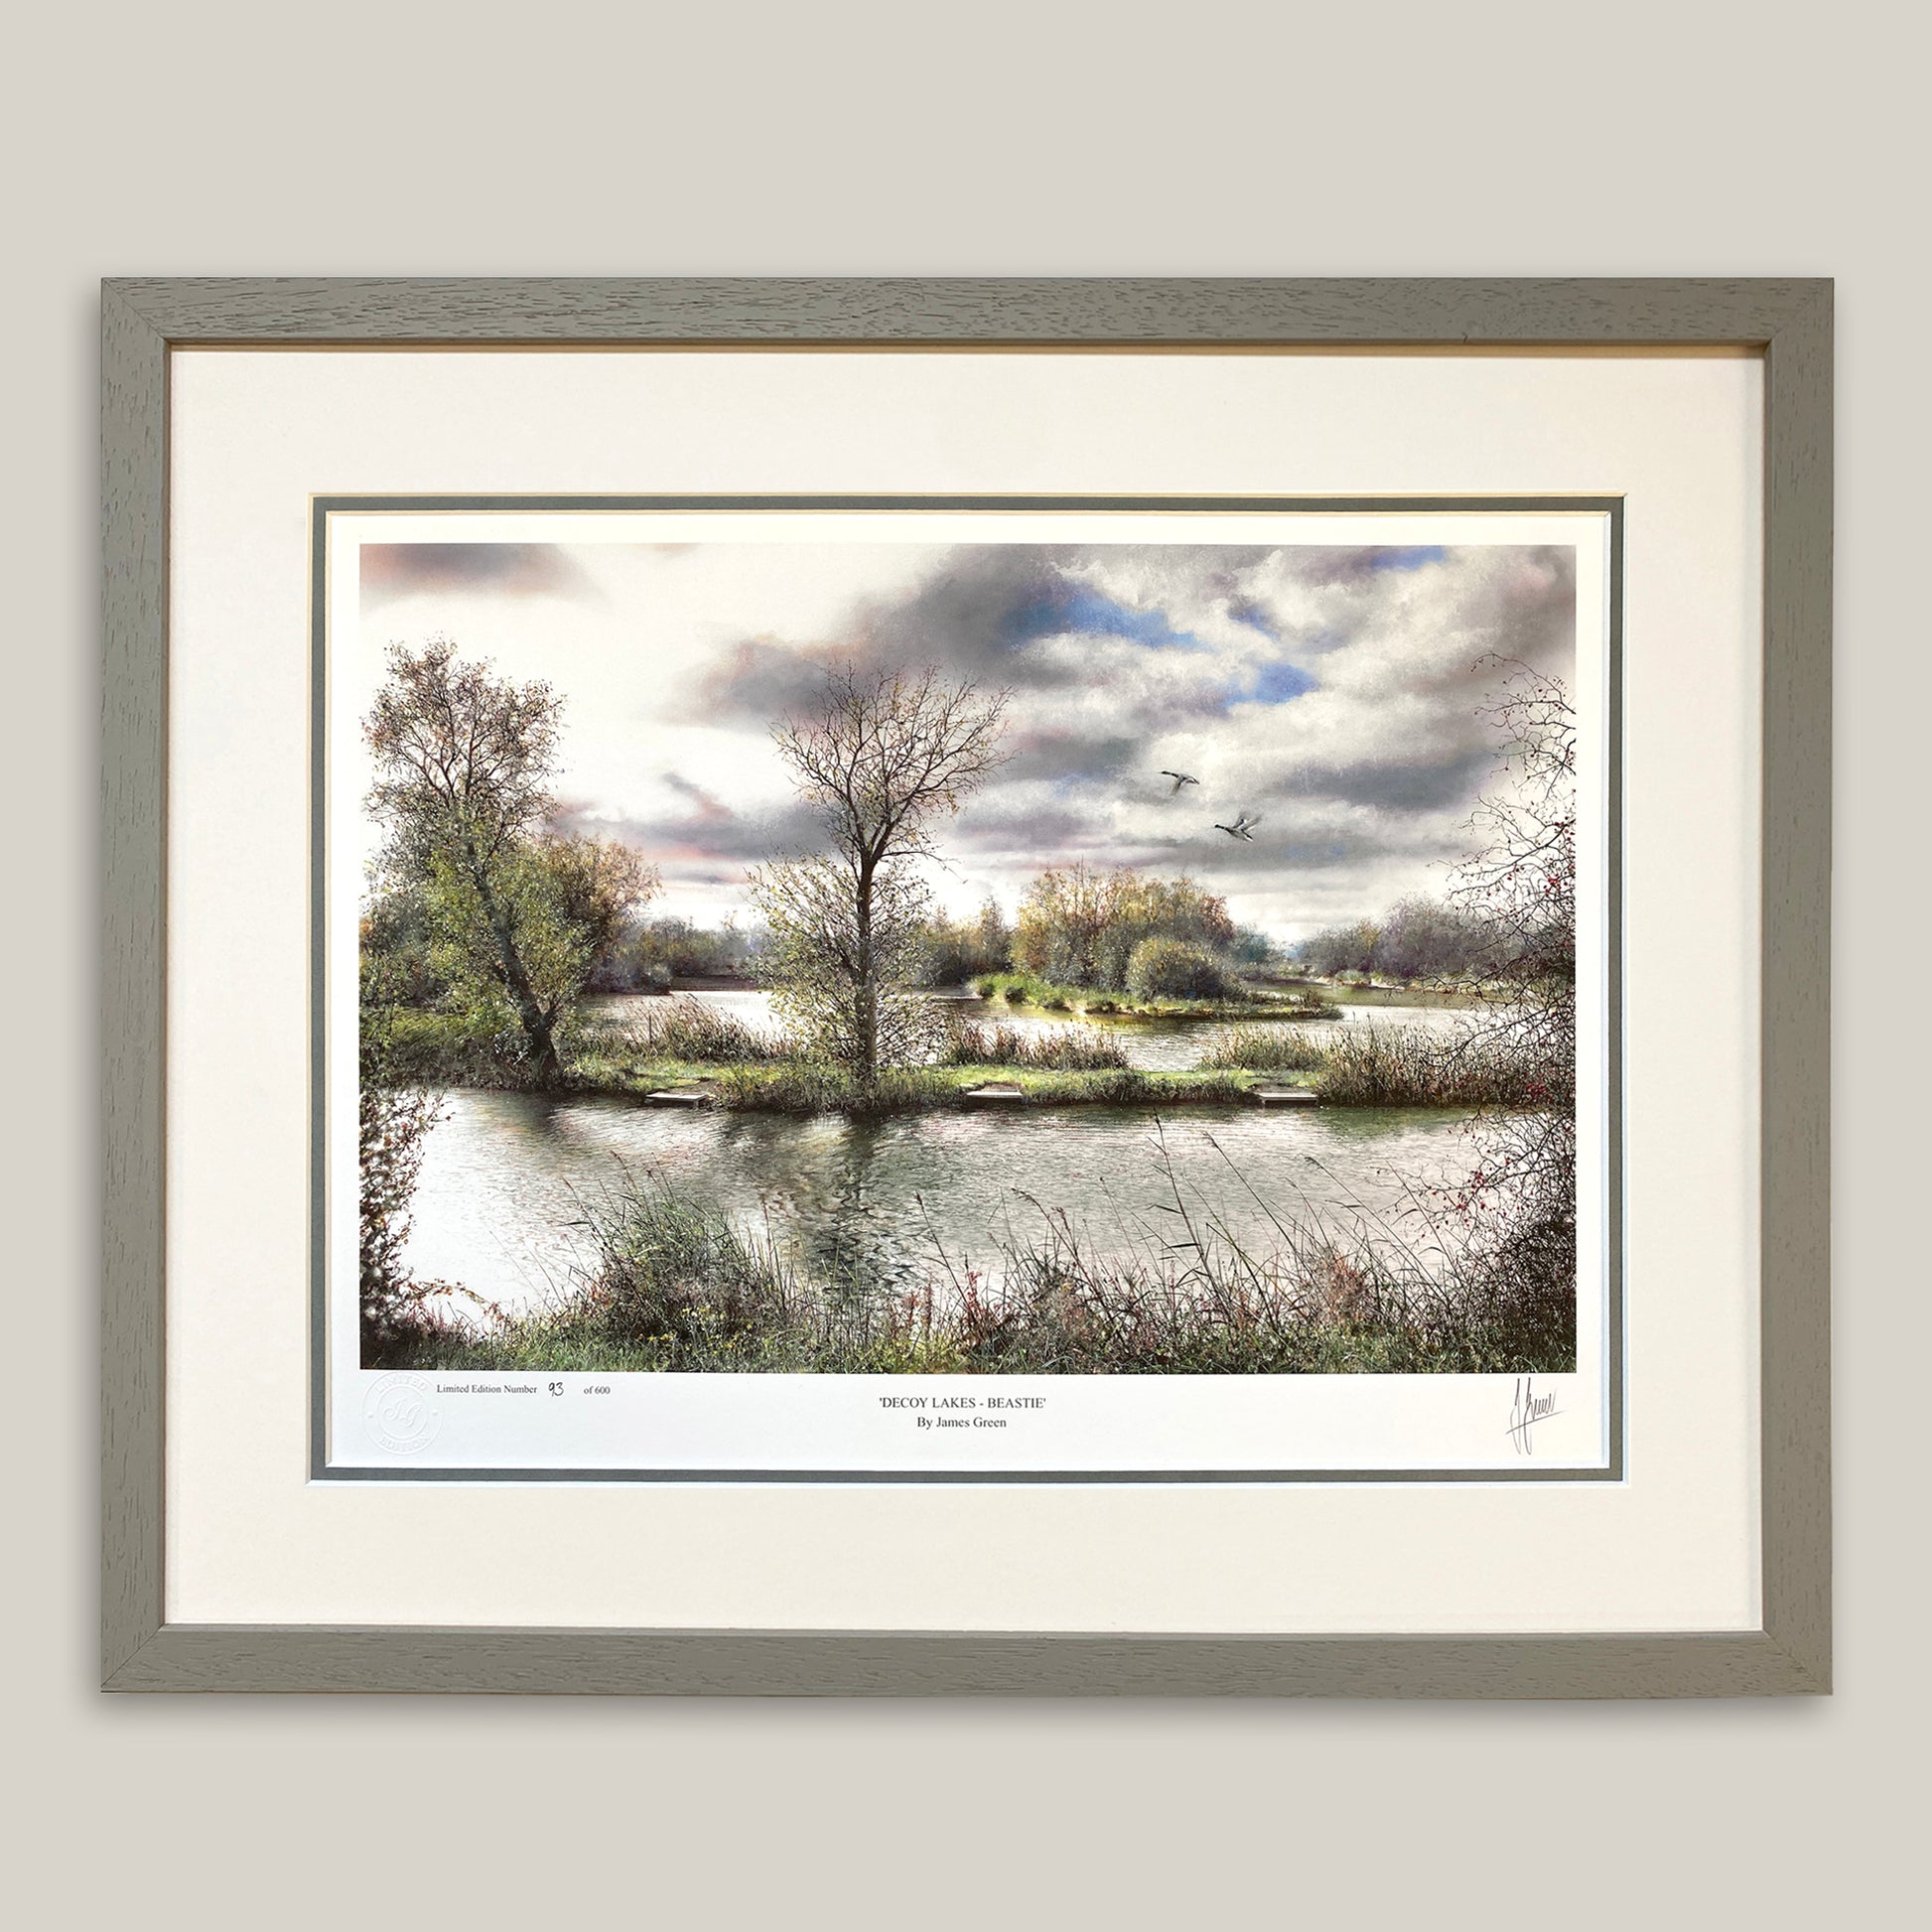 Whittlesey fishing lakes painting by James Green framed in grey